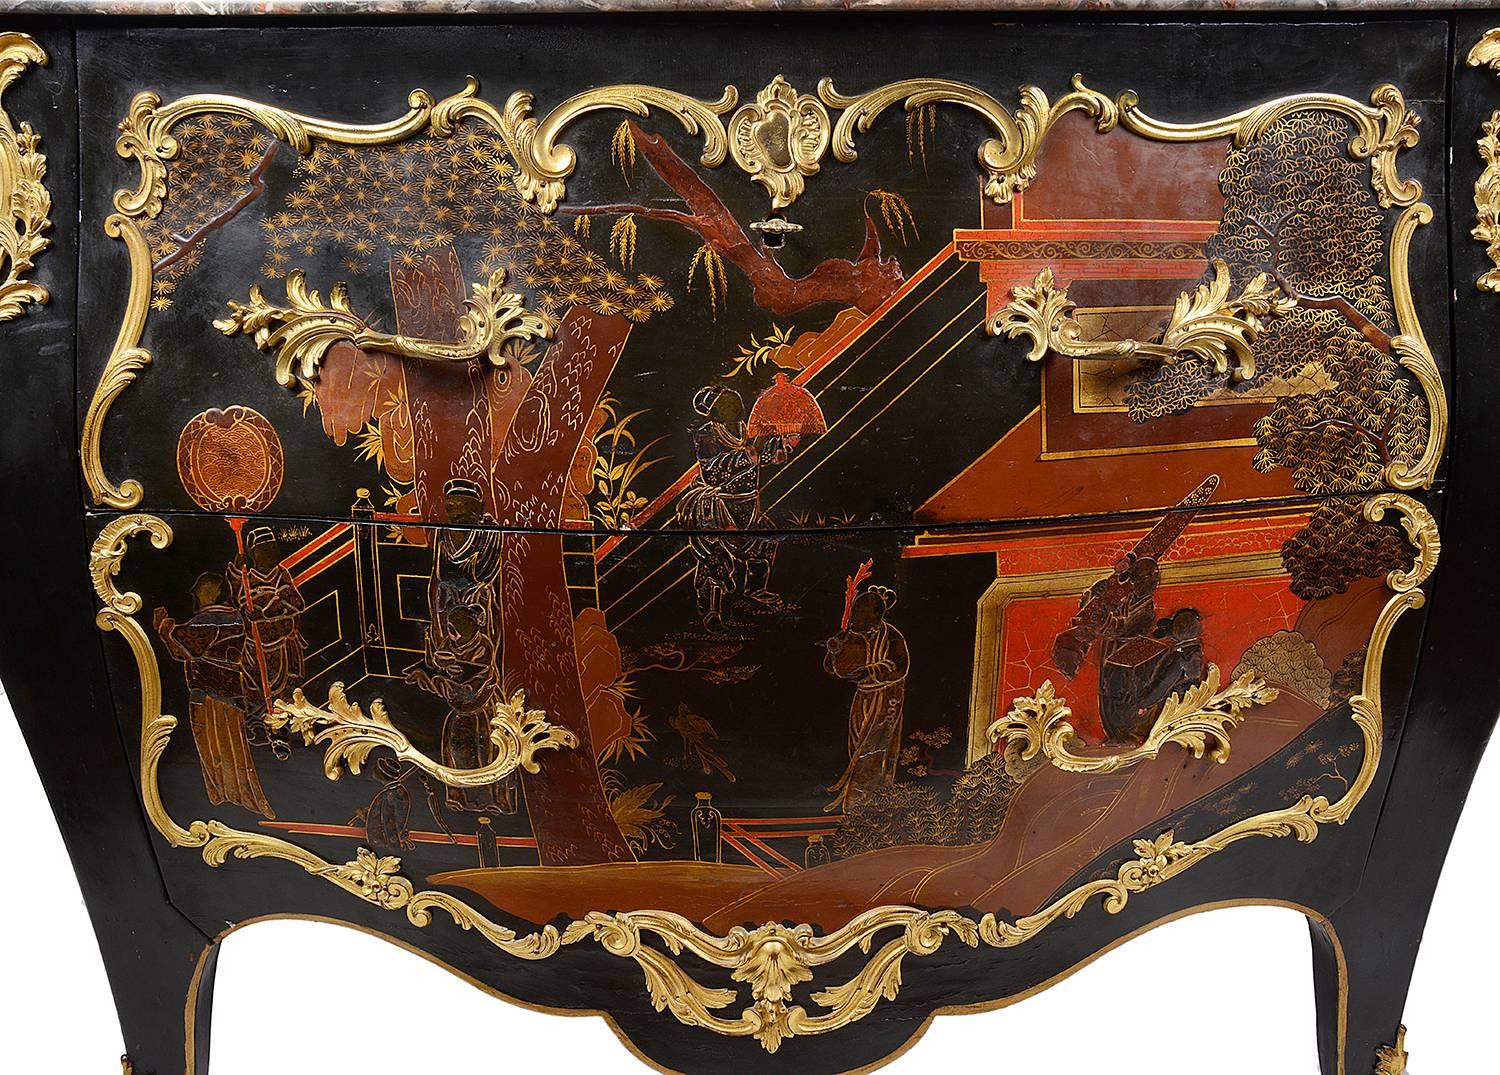 A very good quality early 19th century French Chinoserie lacquer commode, having and serpentine marble top, above two deep drawers, each with an oriental scene and ormolu mounts, raised on out swept legs terminating in scrolling ormolu